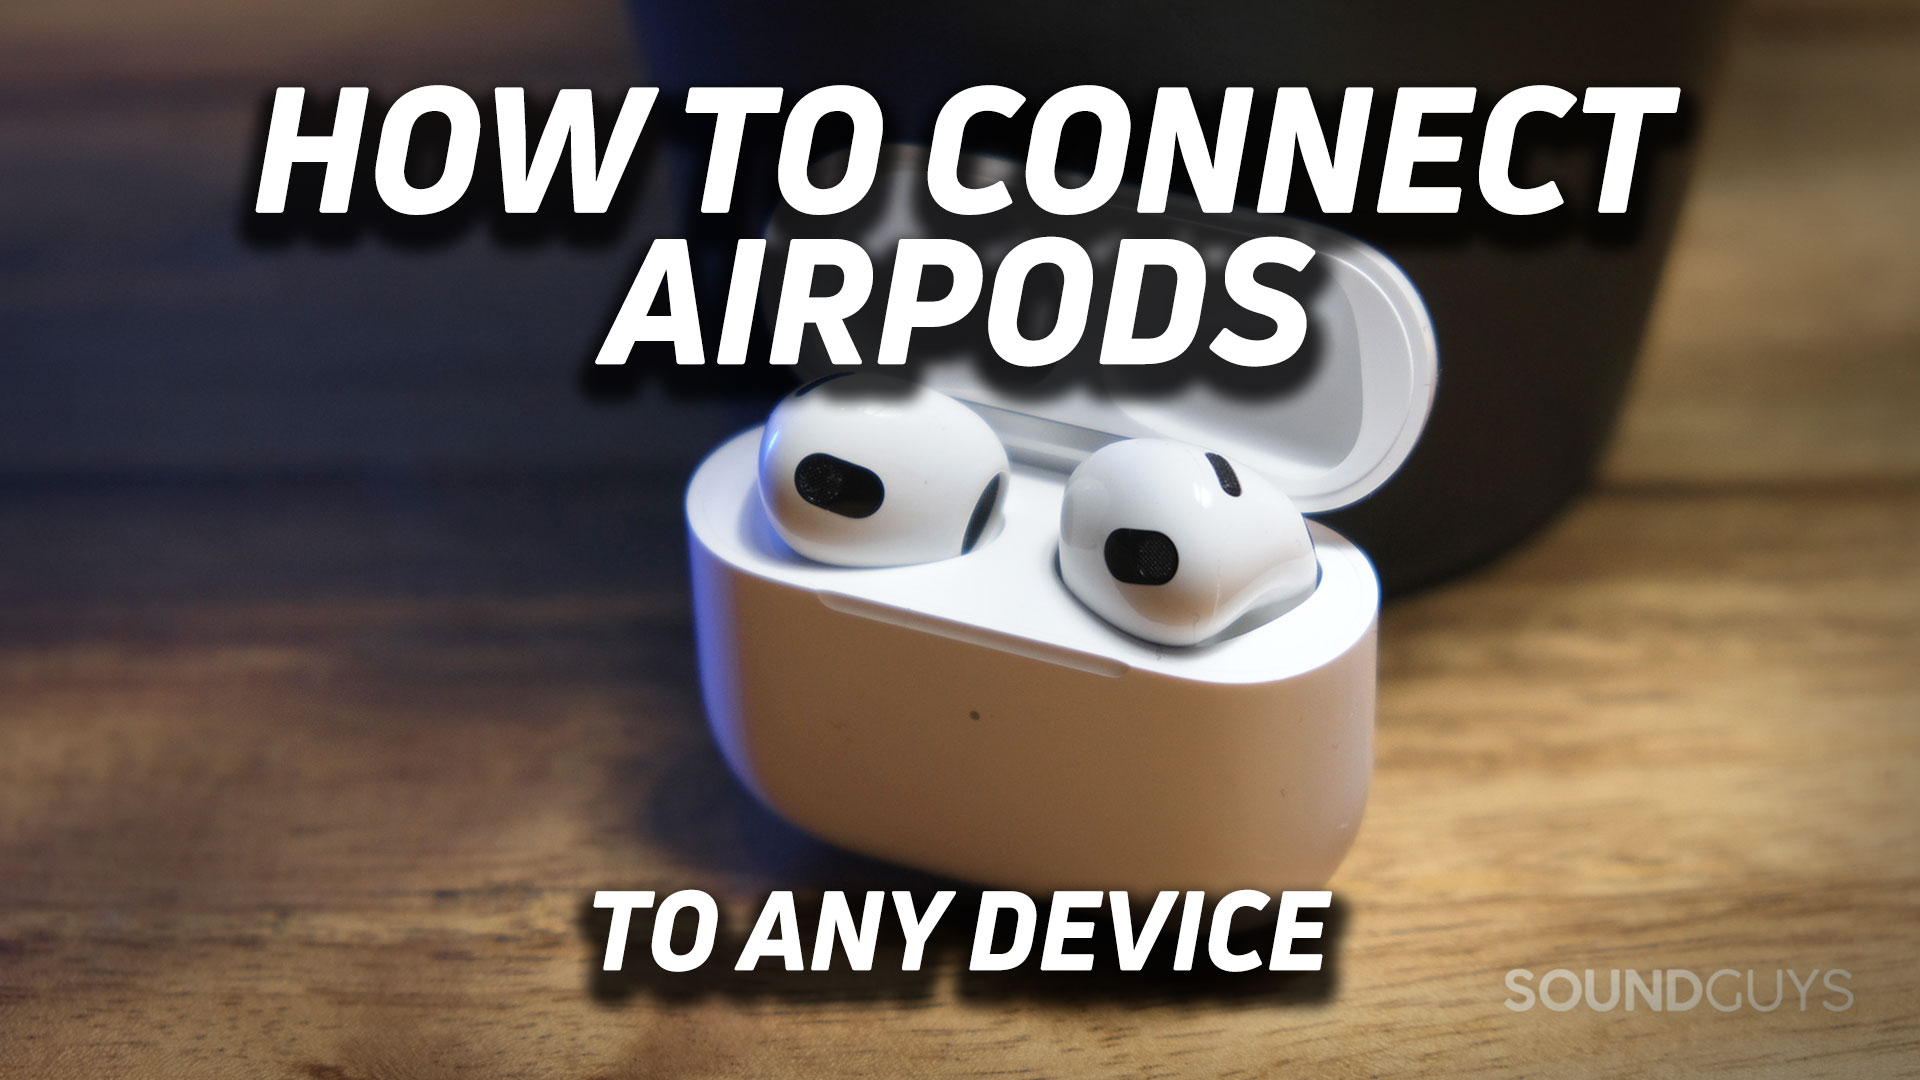 The Apple AirPods (3rd generation) with the text "How to connect AirPods to any device" overlaid atop the image.